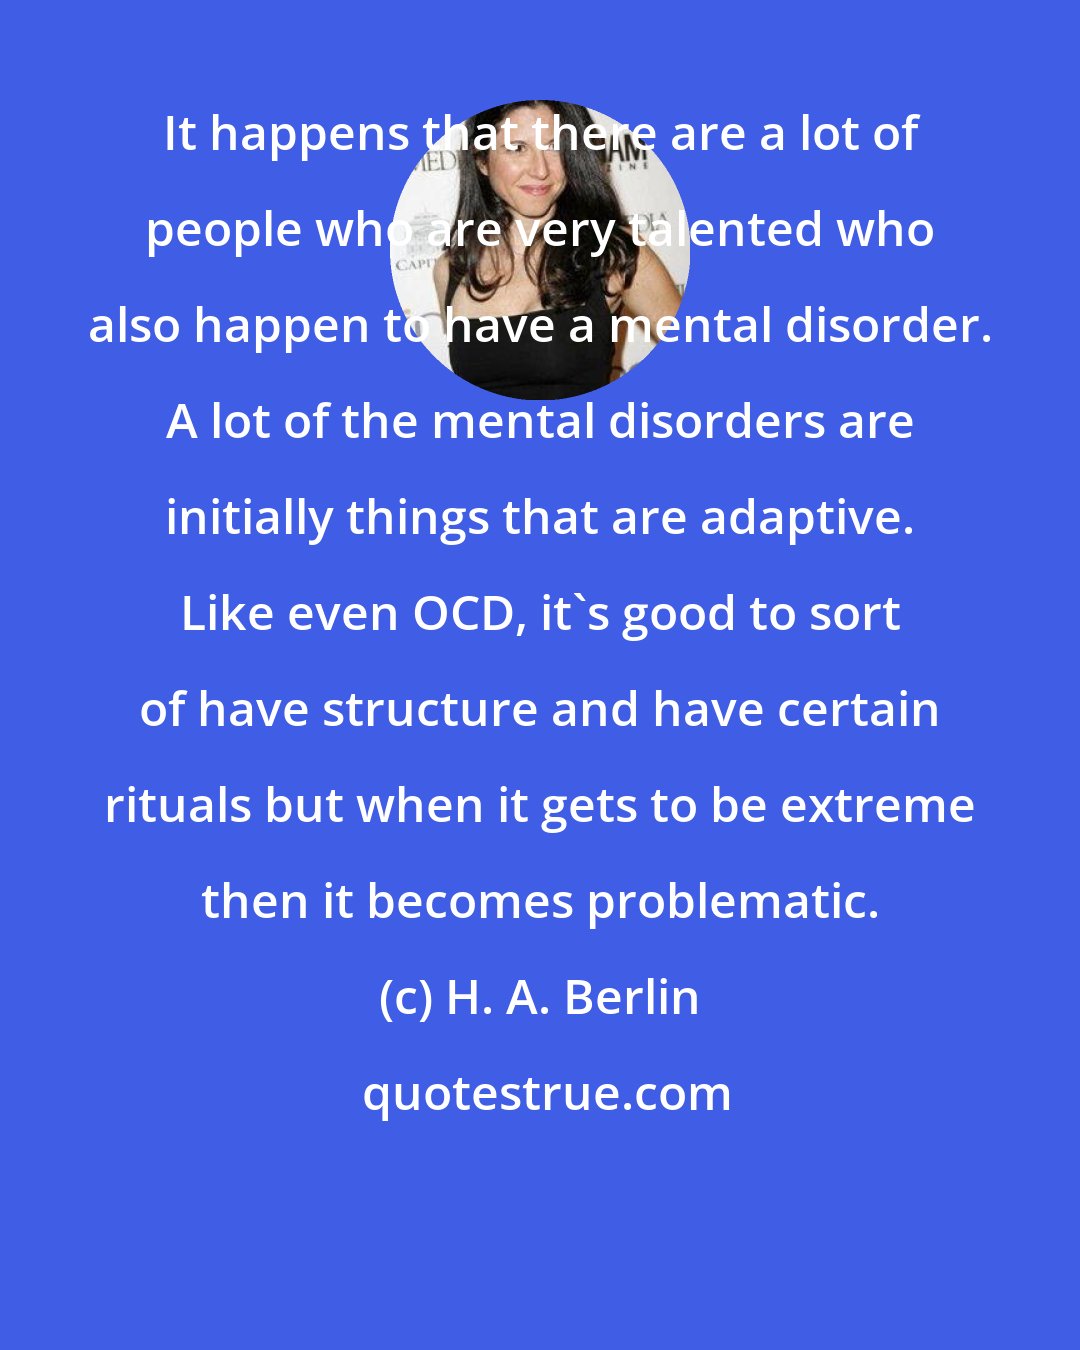 H. A. Berlin: It happens that there are a lot of people who are very talented who also happen to have a mental disorder. A lot of the mental disorders are initially things that are adaptive. Like even OCD, it's good to sort of have structure and have certain rituals but when it gets to be extreme then it becomes problematic.